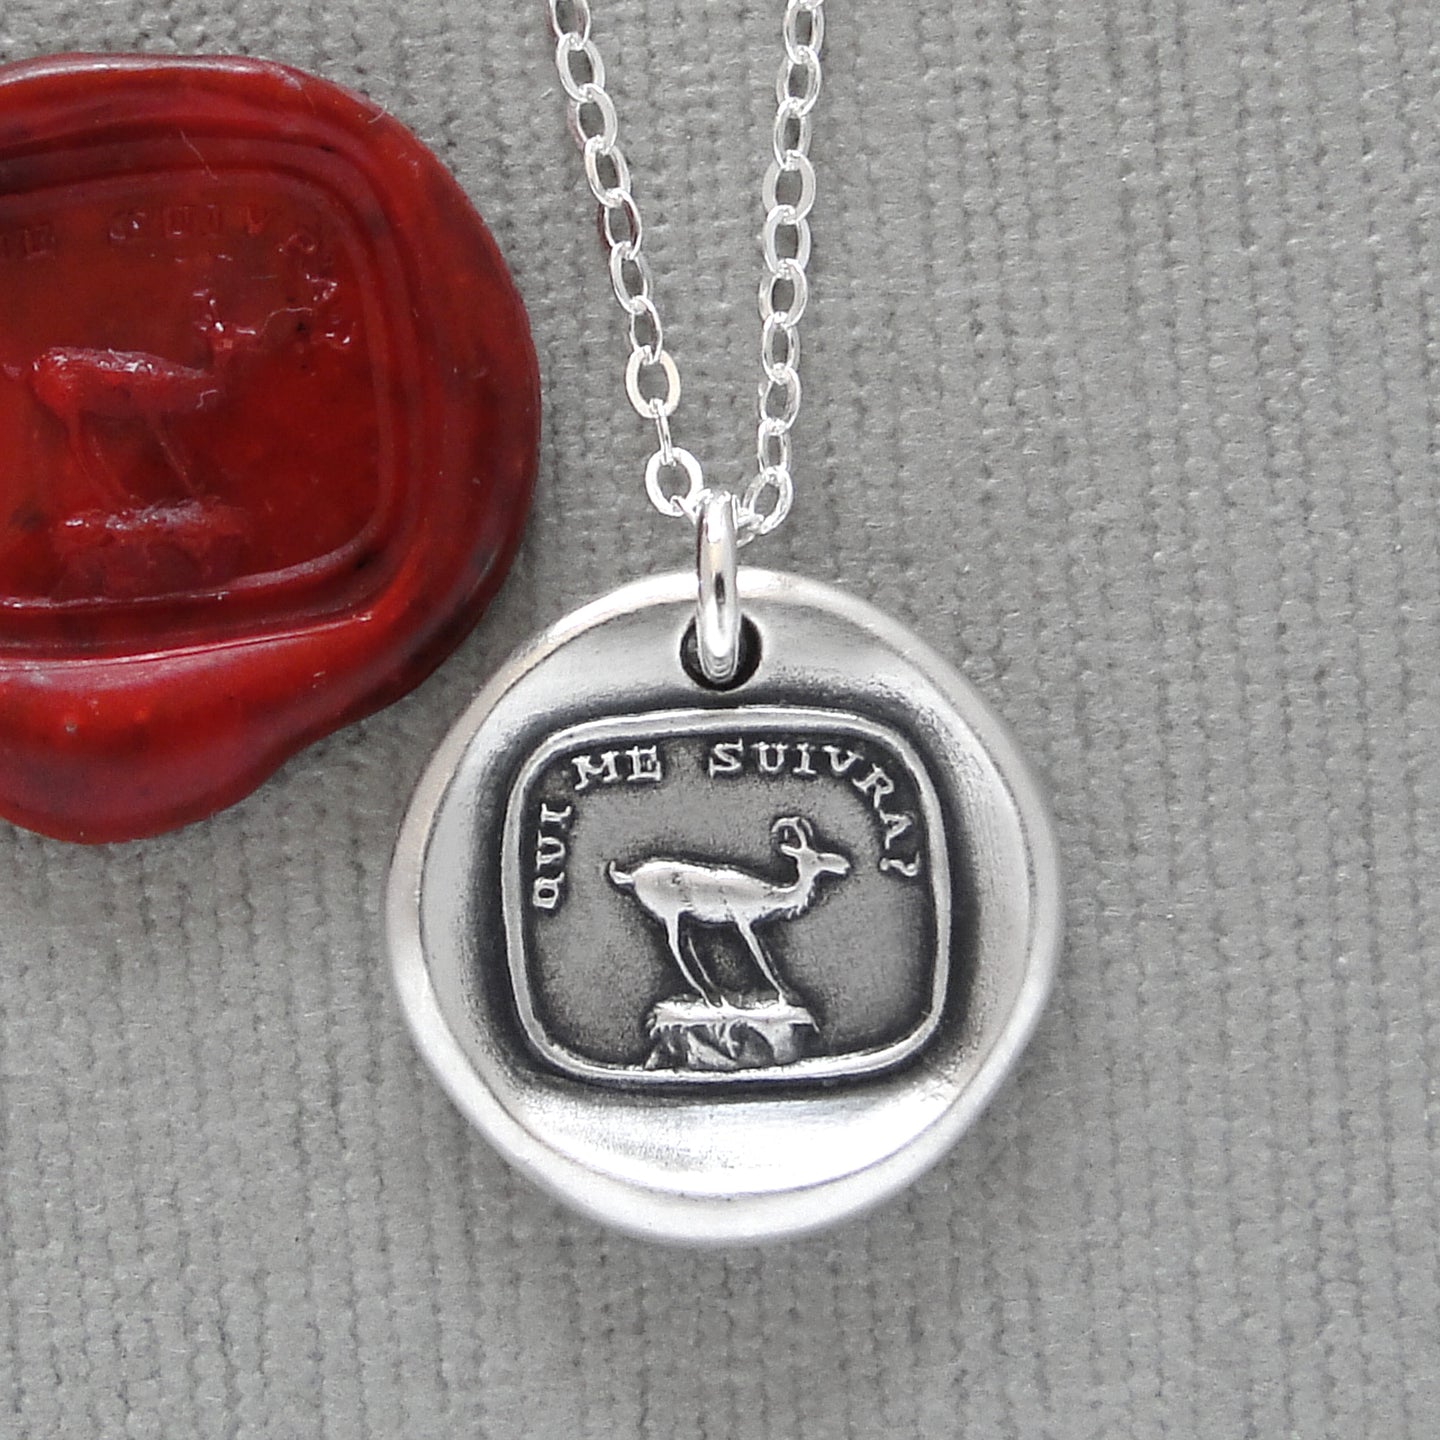 GOAT Wax Seal Necklace - Greatest Of All Time - Antique Silver Wax Seal Jewelry French Motto